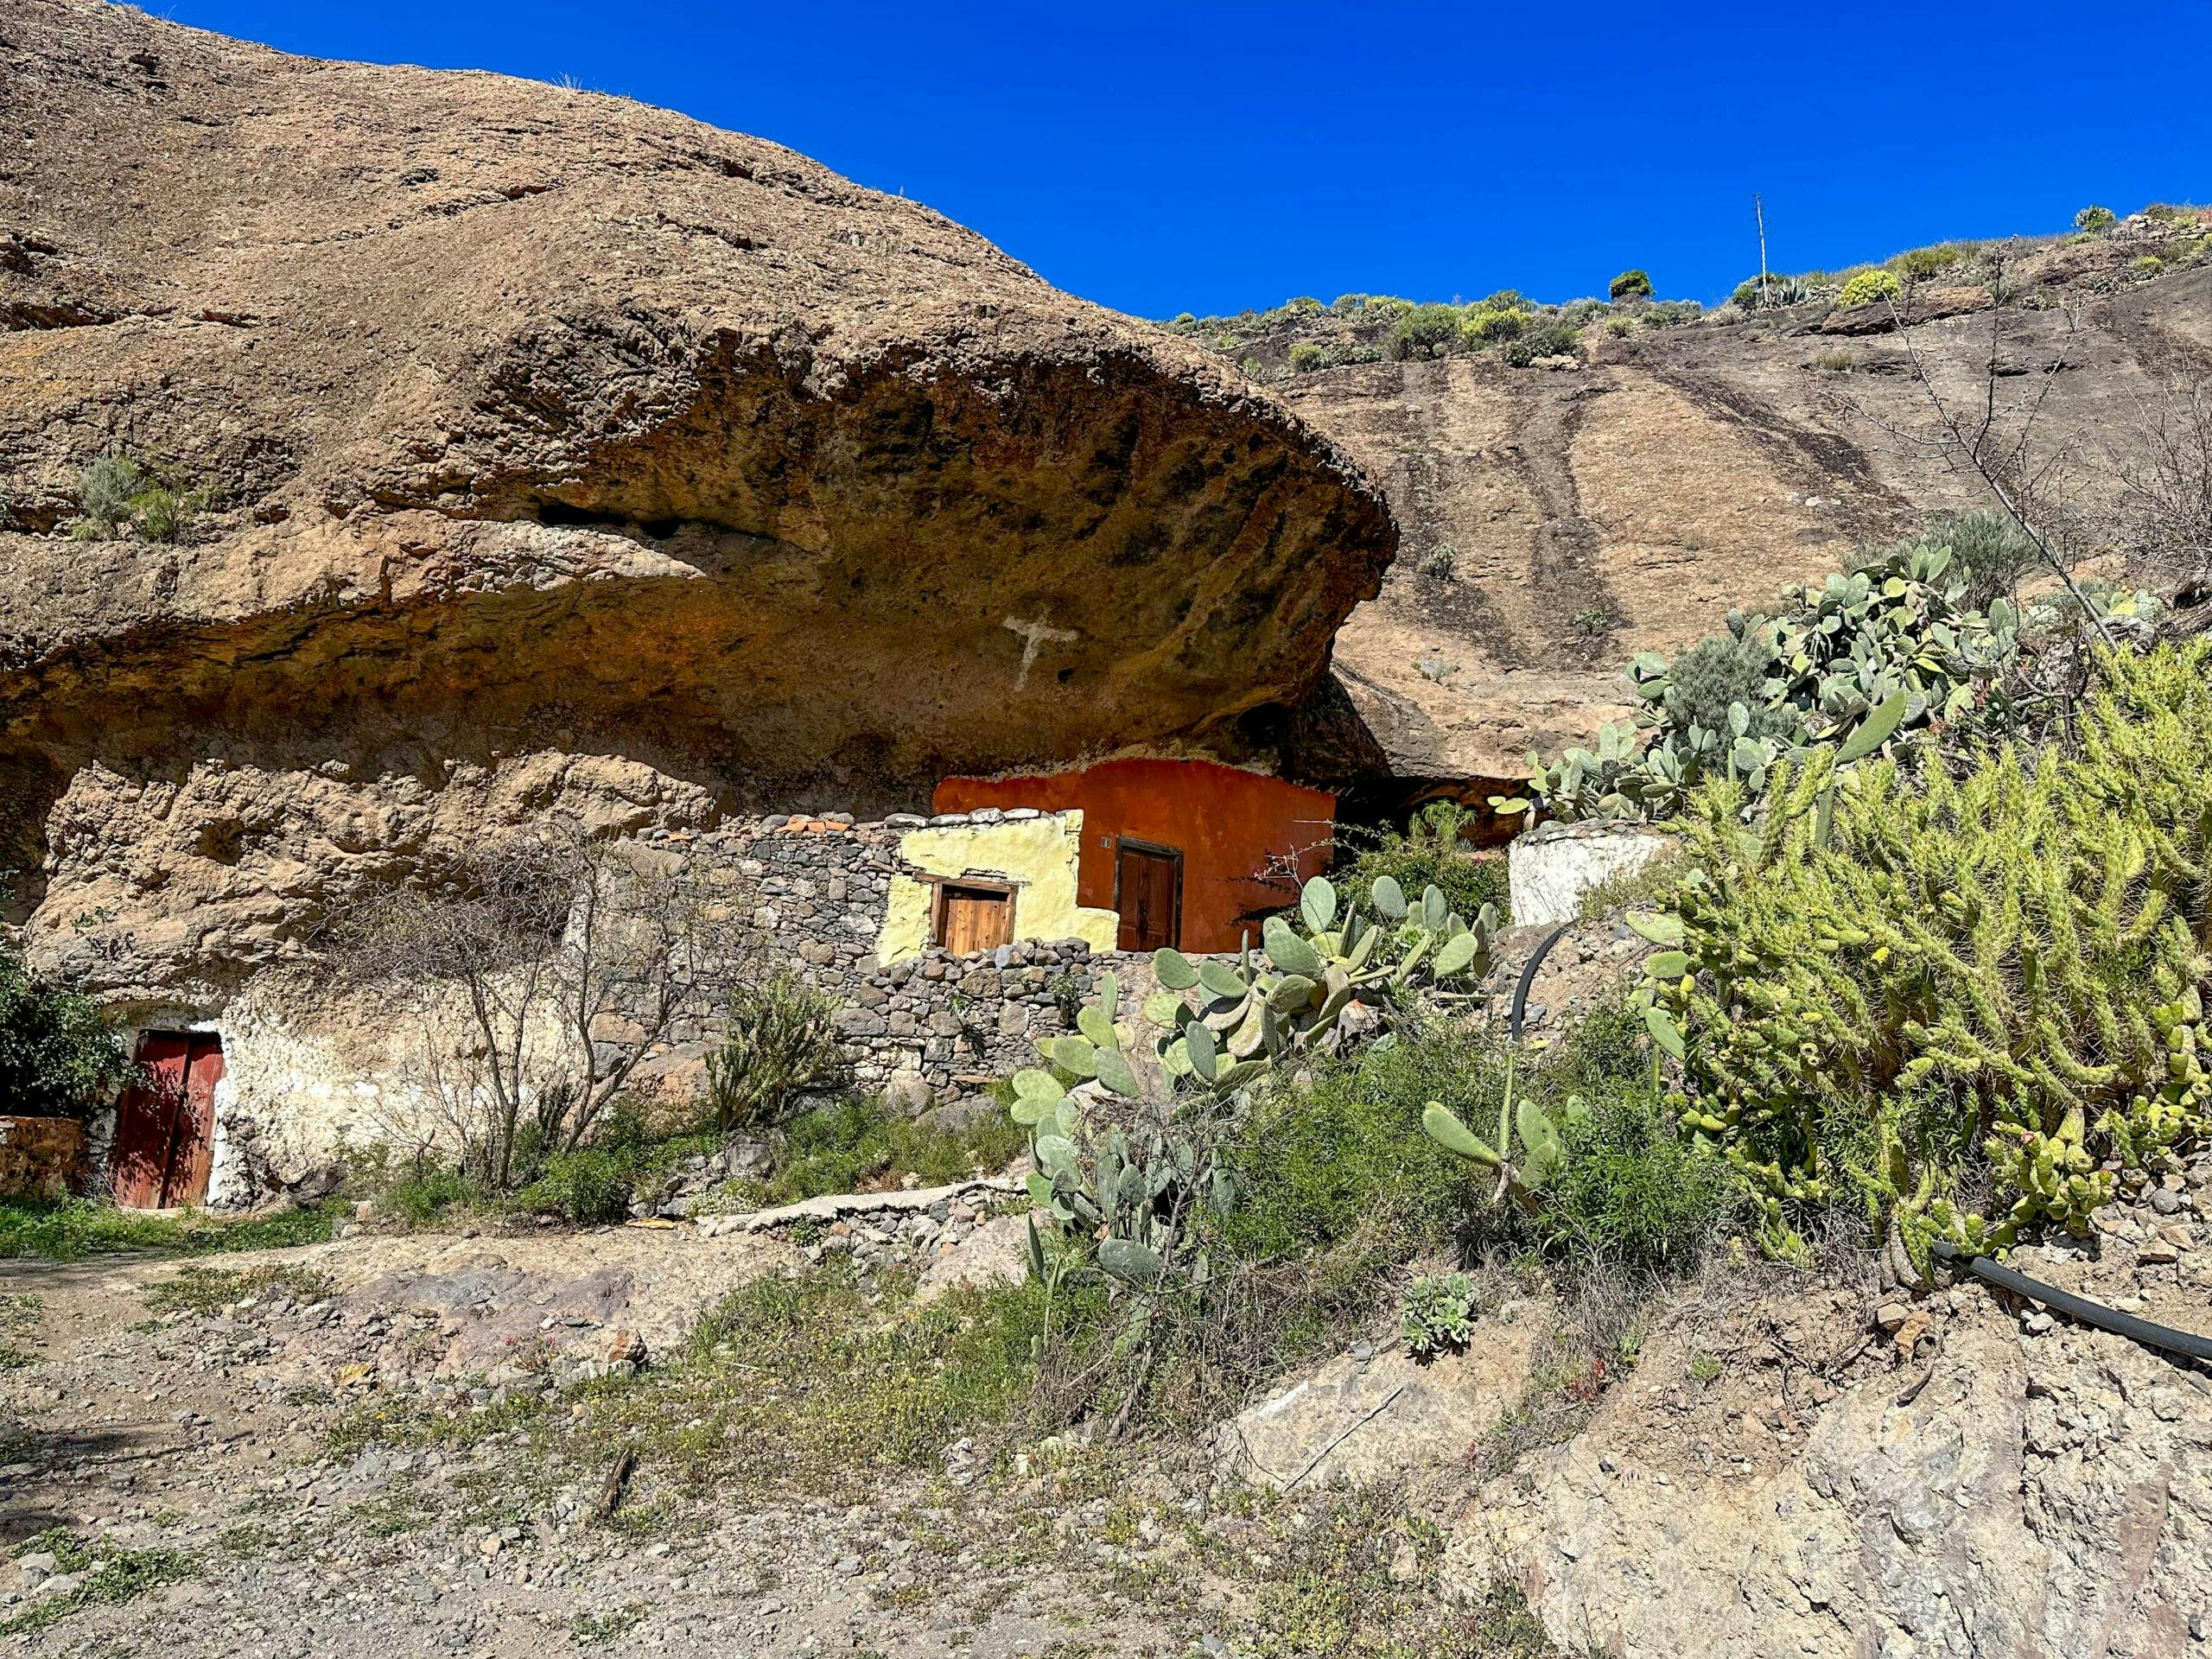 Lonely cave houses at the end of the road and beginning of the Barranco Manantiales - Cercados de Araña gorge trail.